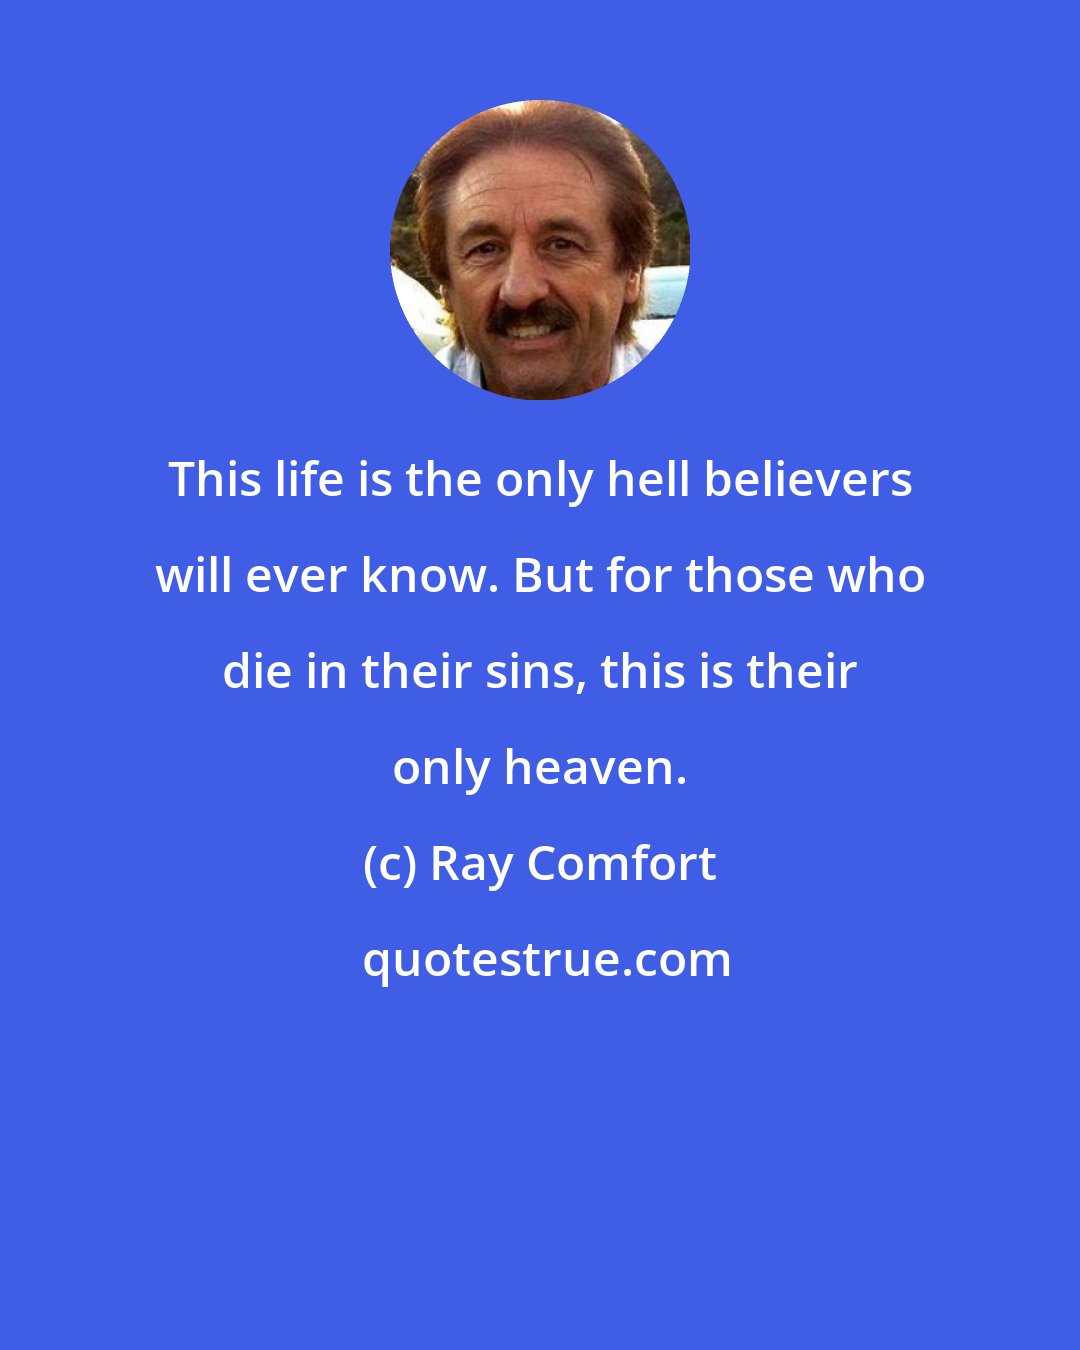 Ray Comfort: This life is the only hell believers will ever know. But for those who die in their sins, this is their only heaven.